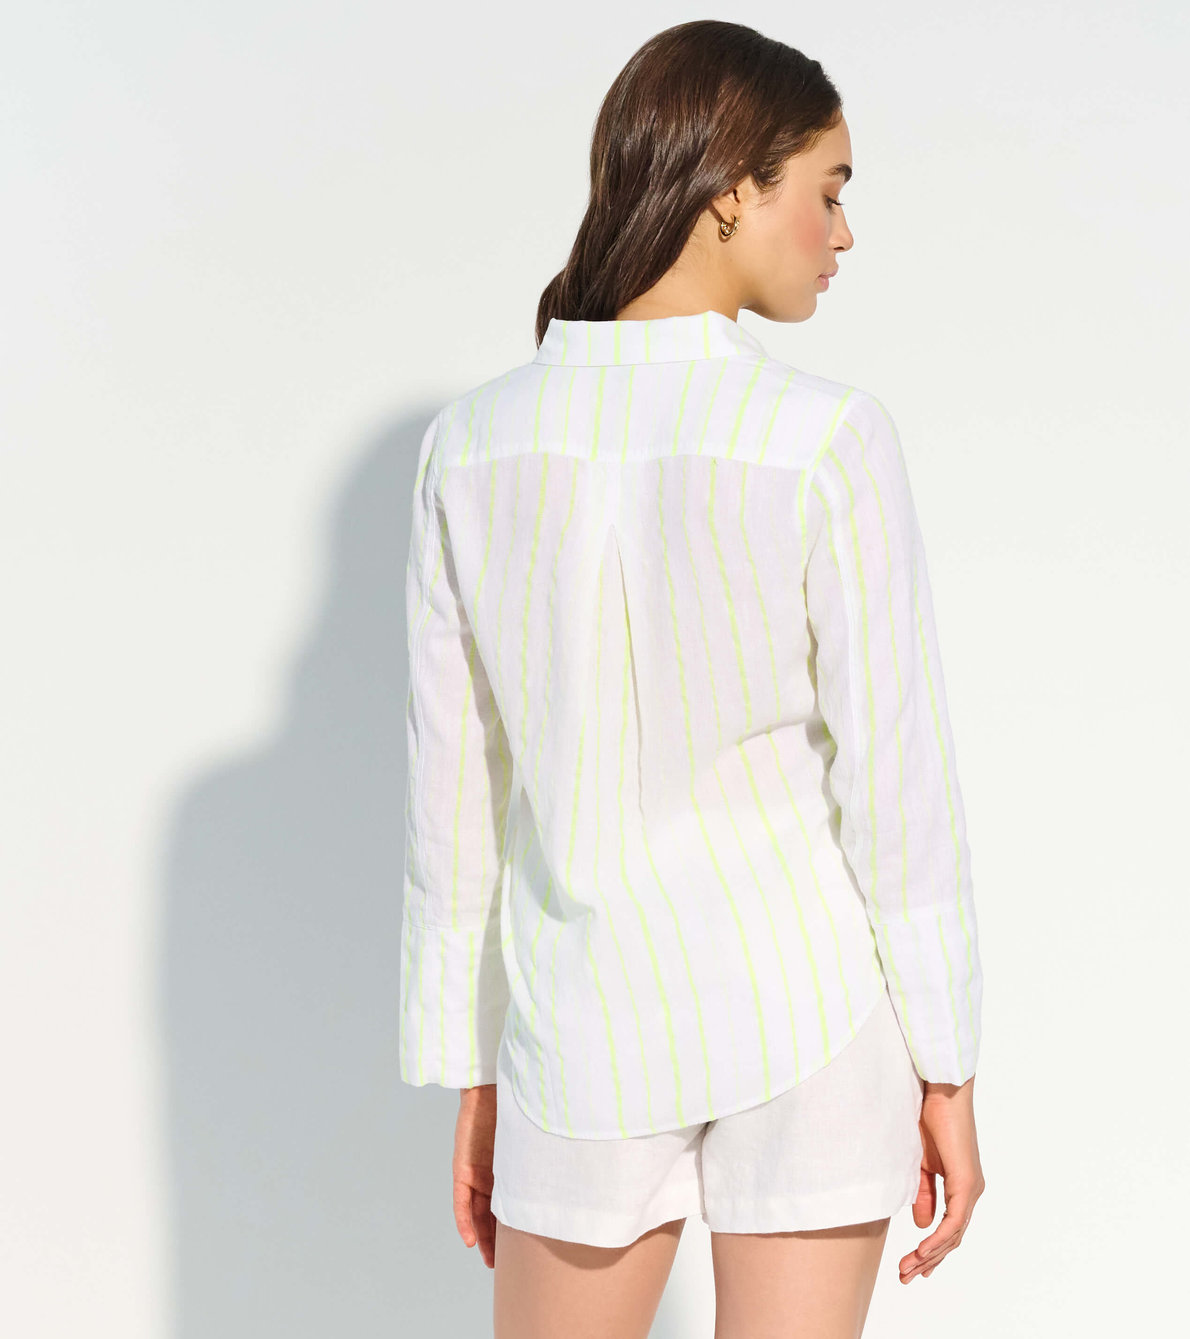 View larger image of Cindy Blouse - Neon Yellow Stripe